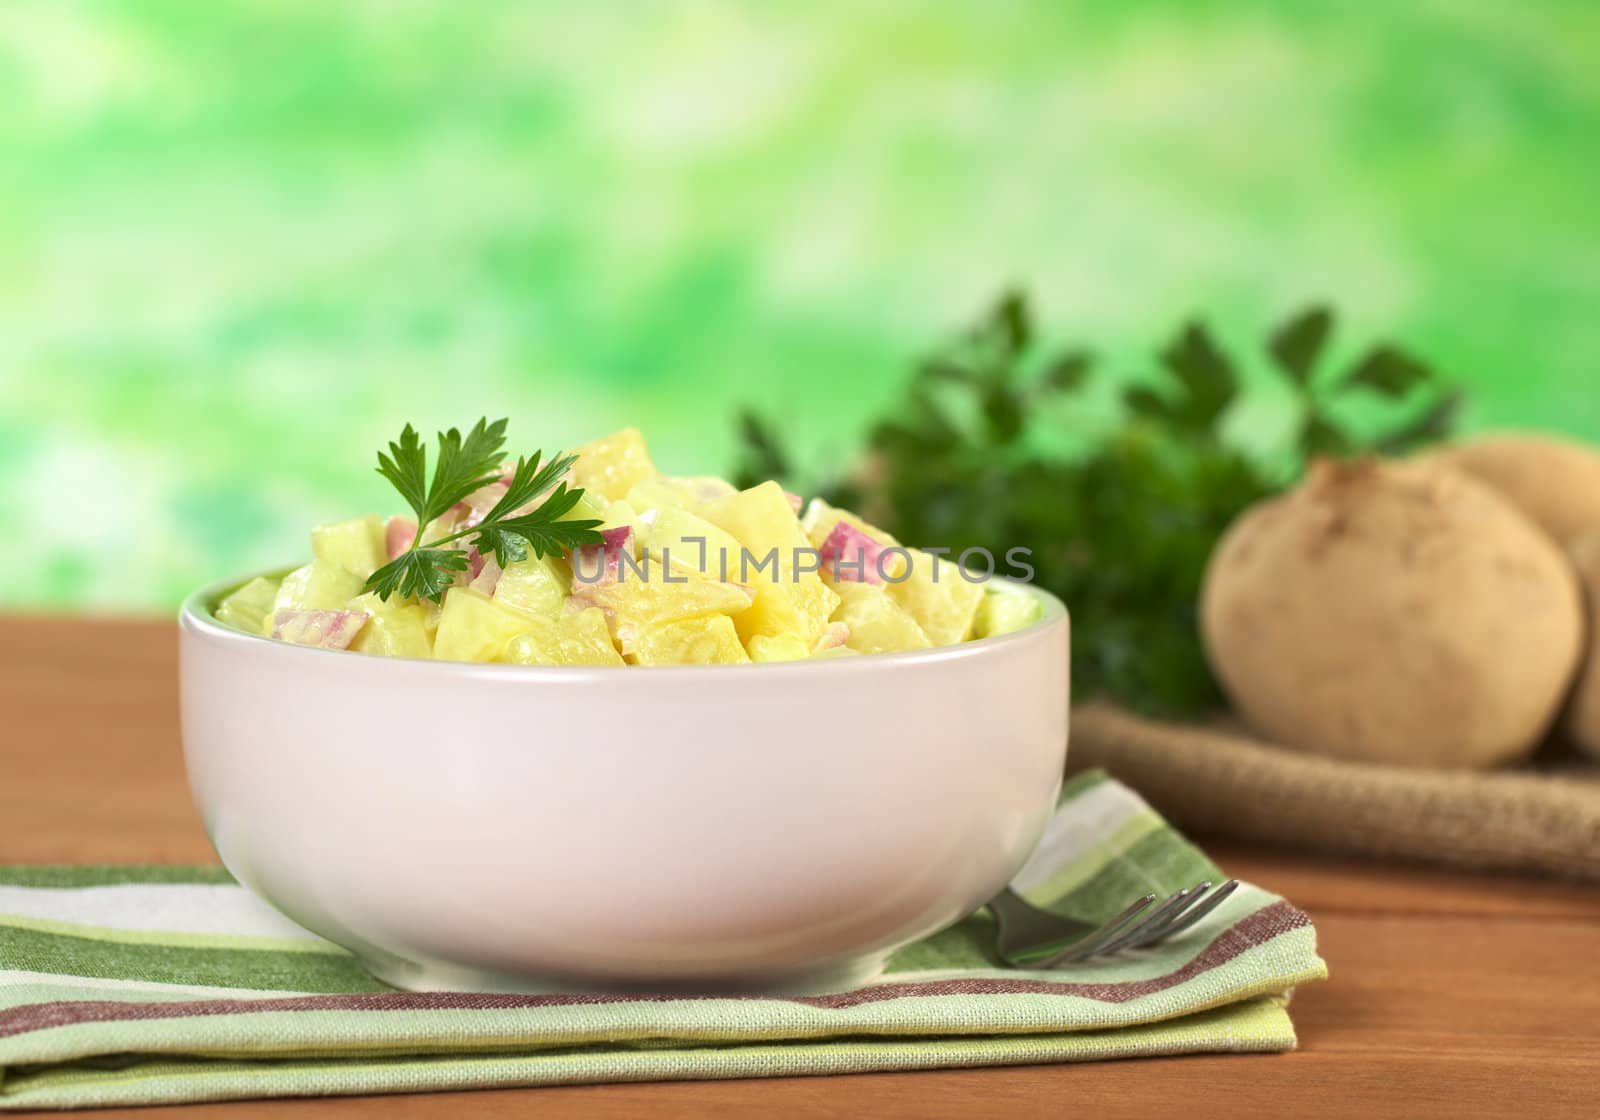 Potato salad made of cooked potatoes, red onions and cucumber, seasoned with a mayonnaise dressing and garnished with a parsley leaf (Selective Focus, Focus on the front of the salad and the leaf)